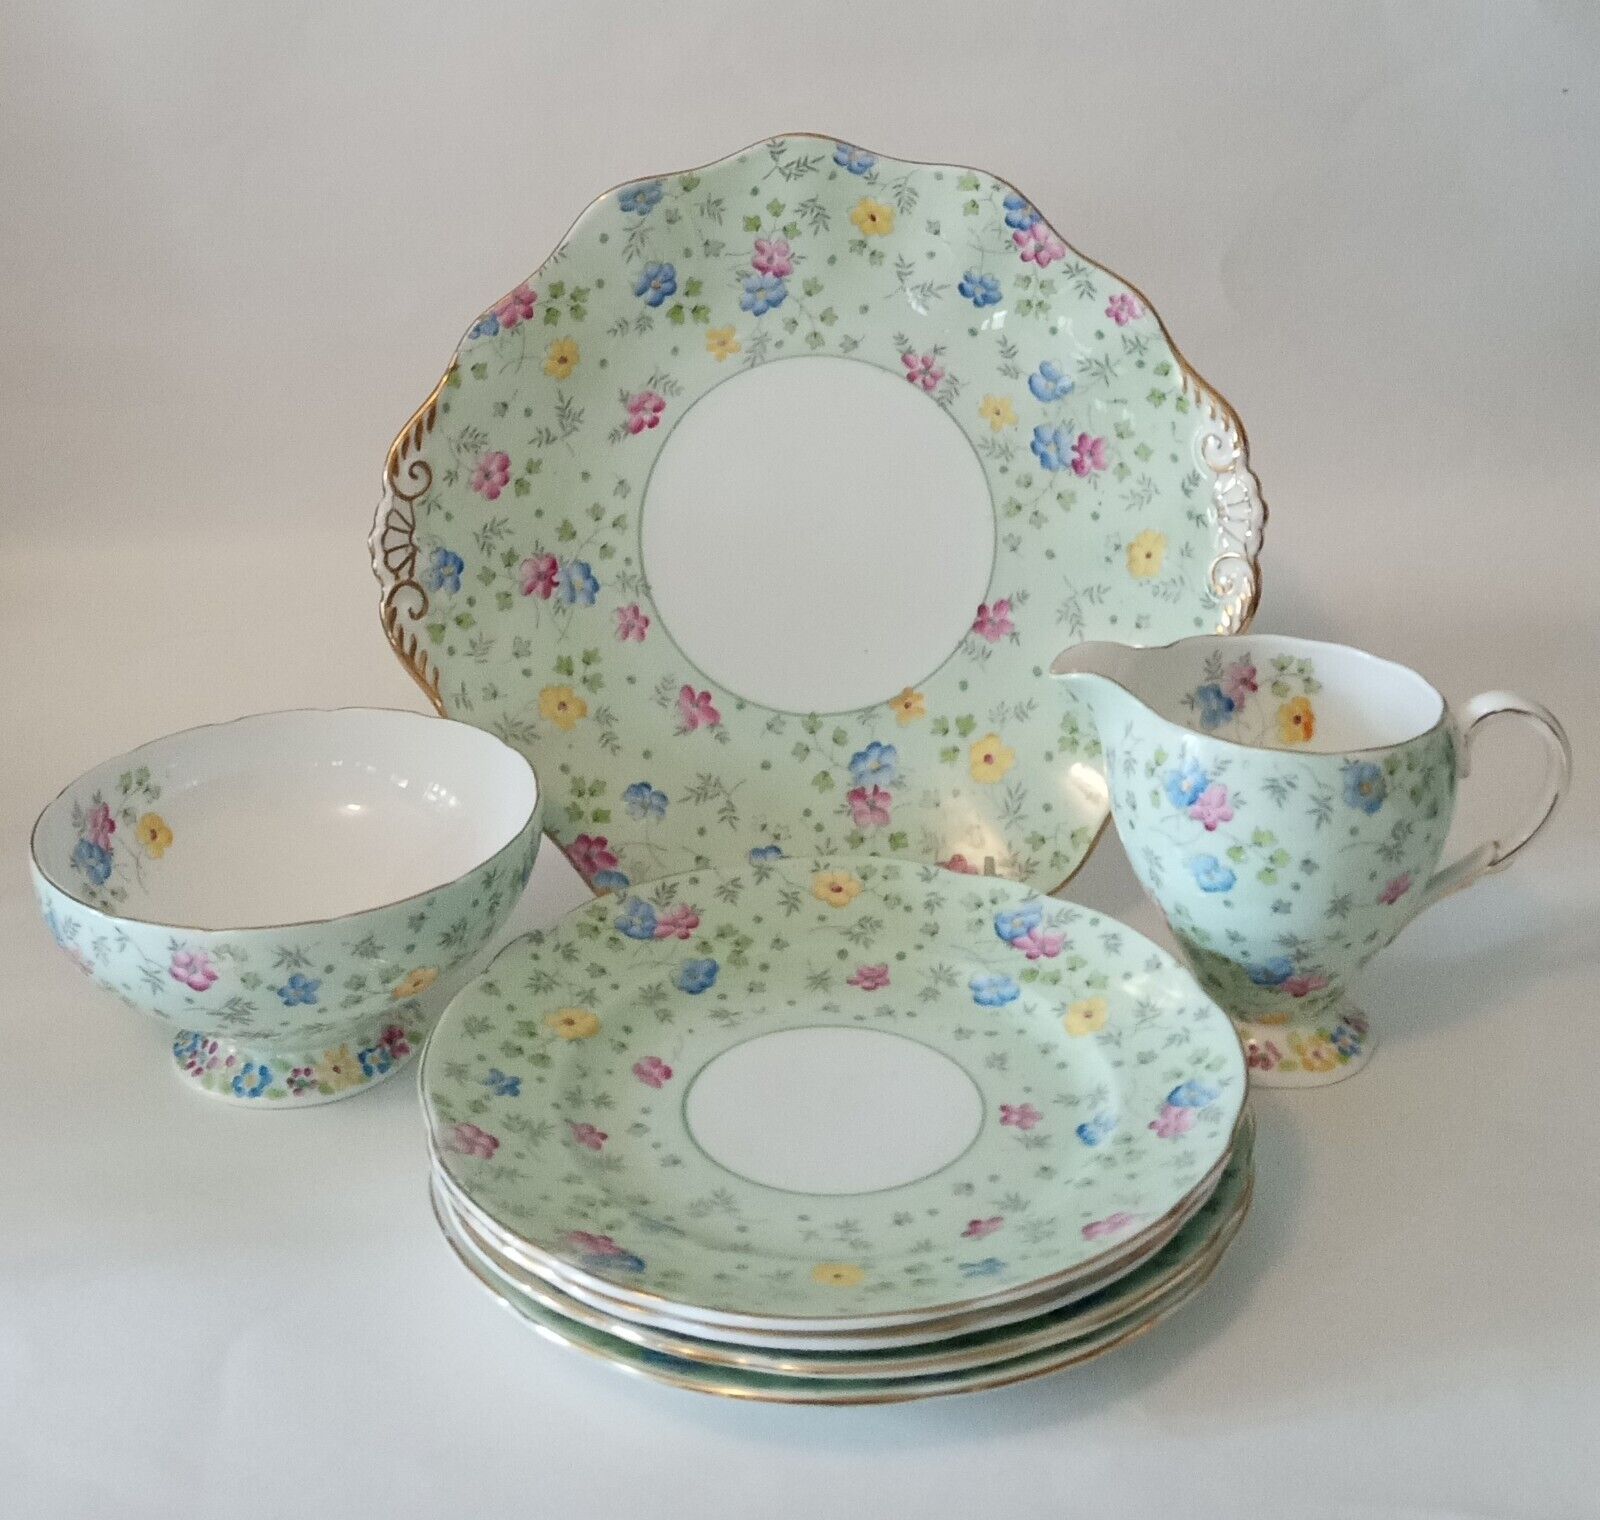 Rare EB FOLEY Bone China Cake Plate Set, Mint Green Florals, Made In England